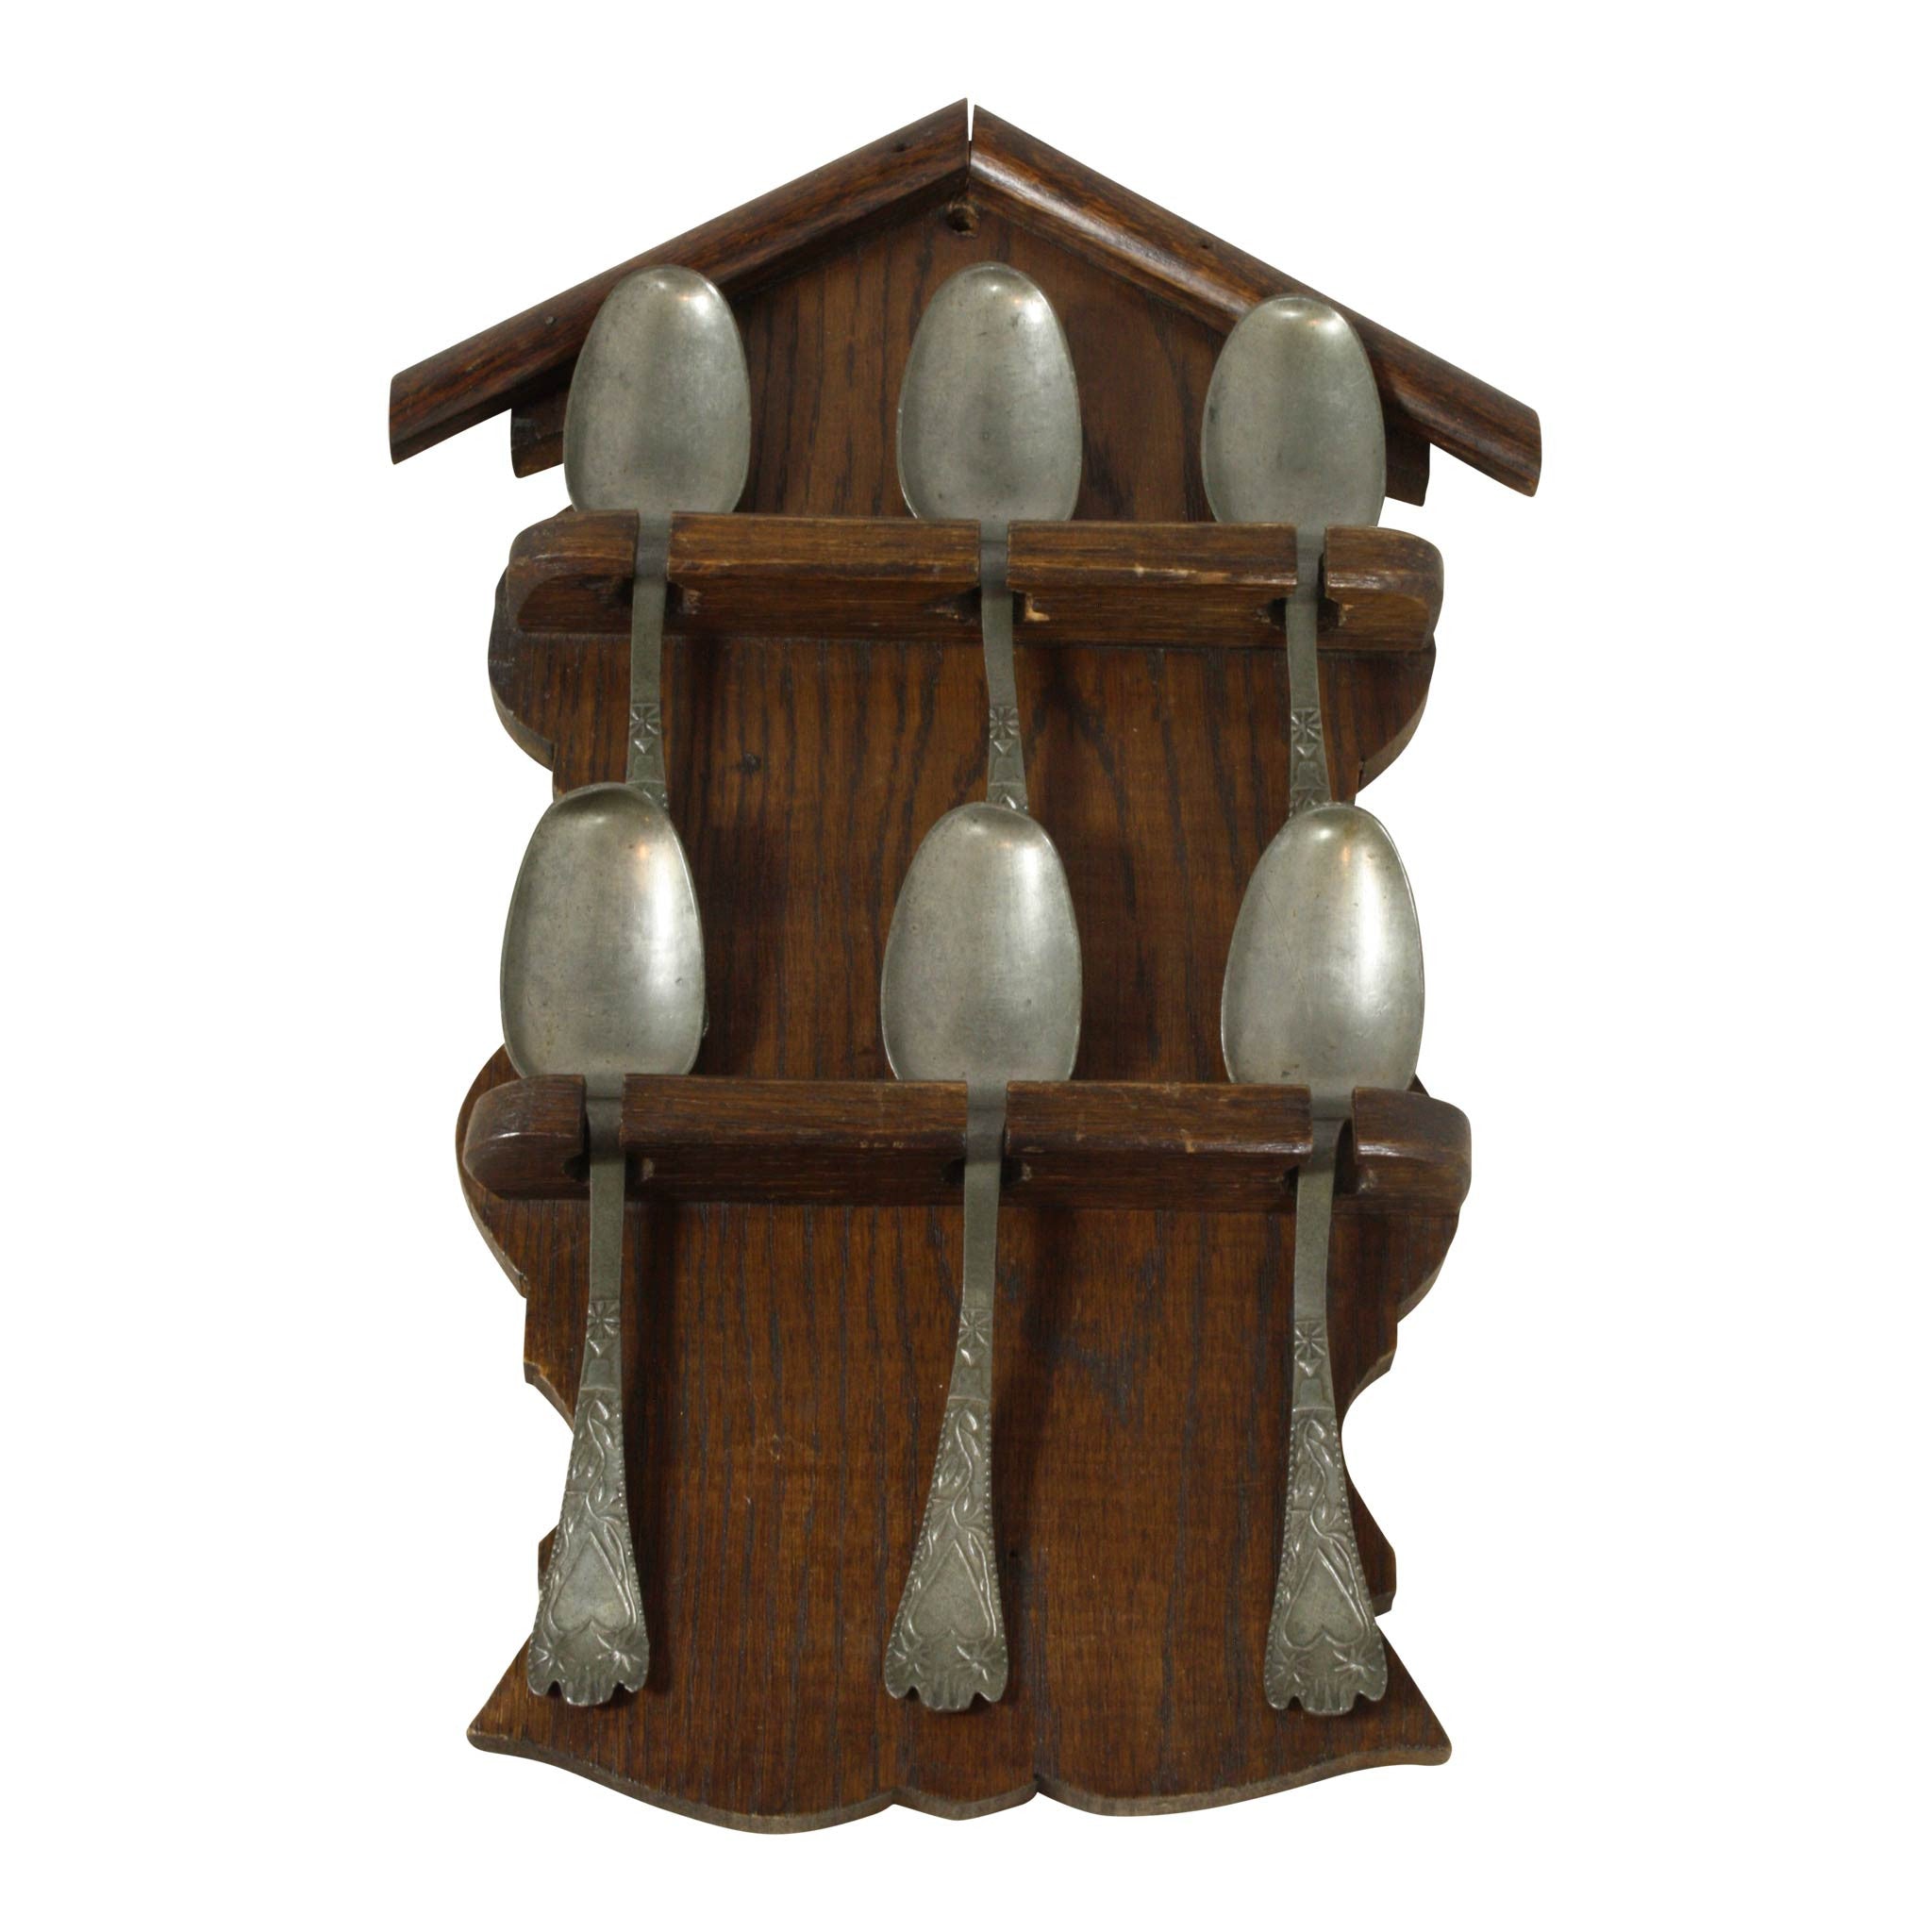 Wooden Spoon Rack with Six Spoons